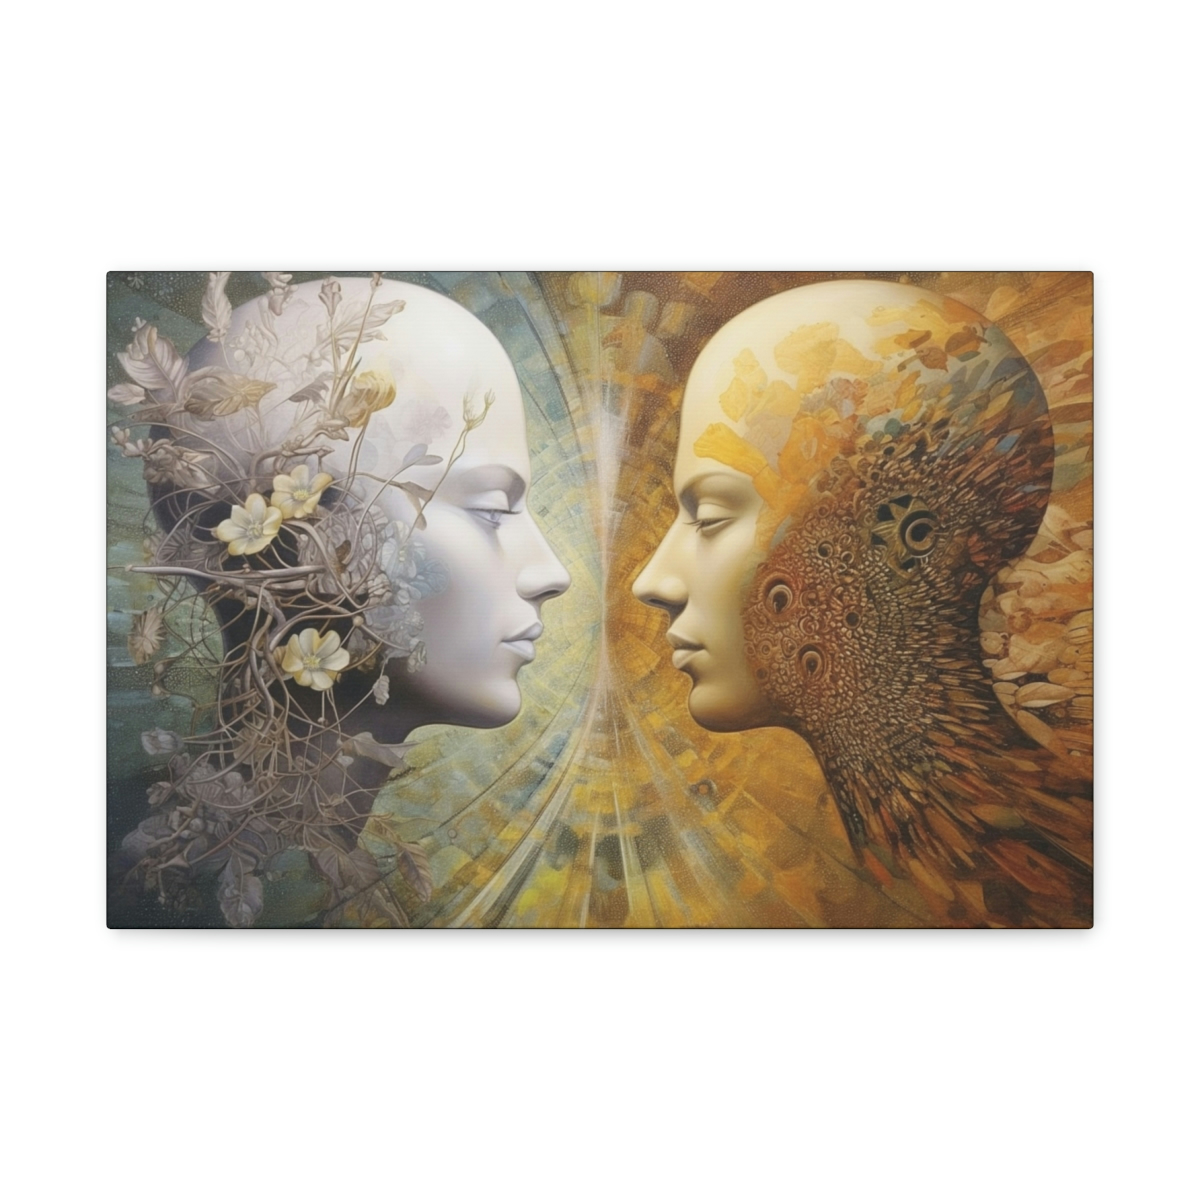 DMT Art Canvas Print: On The Other Side